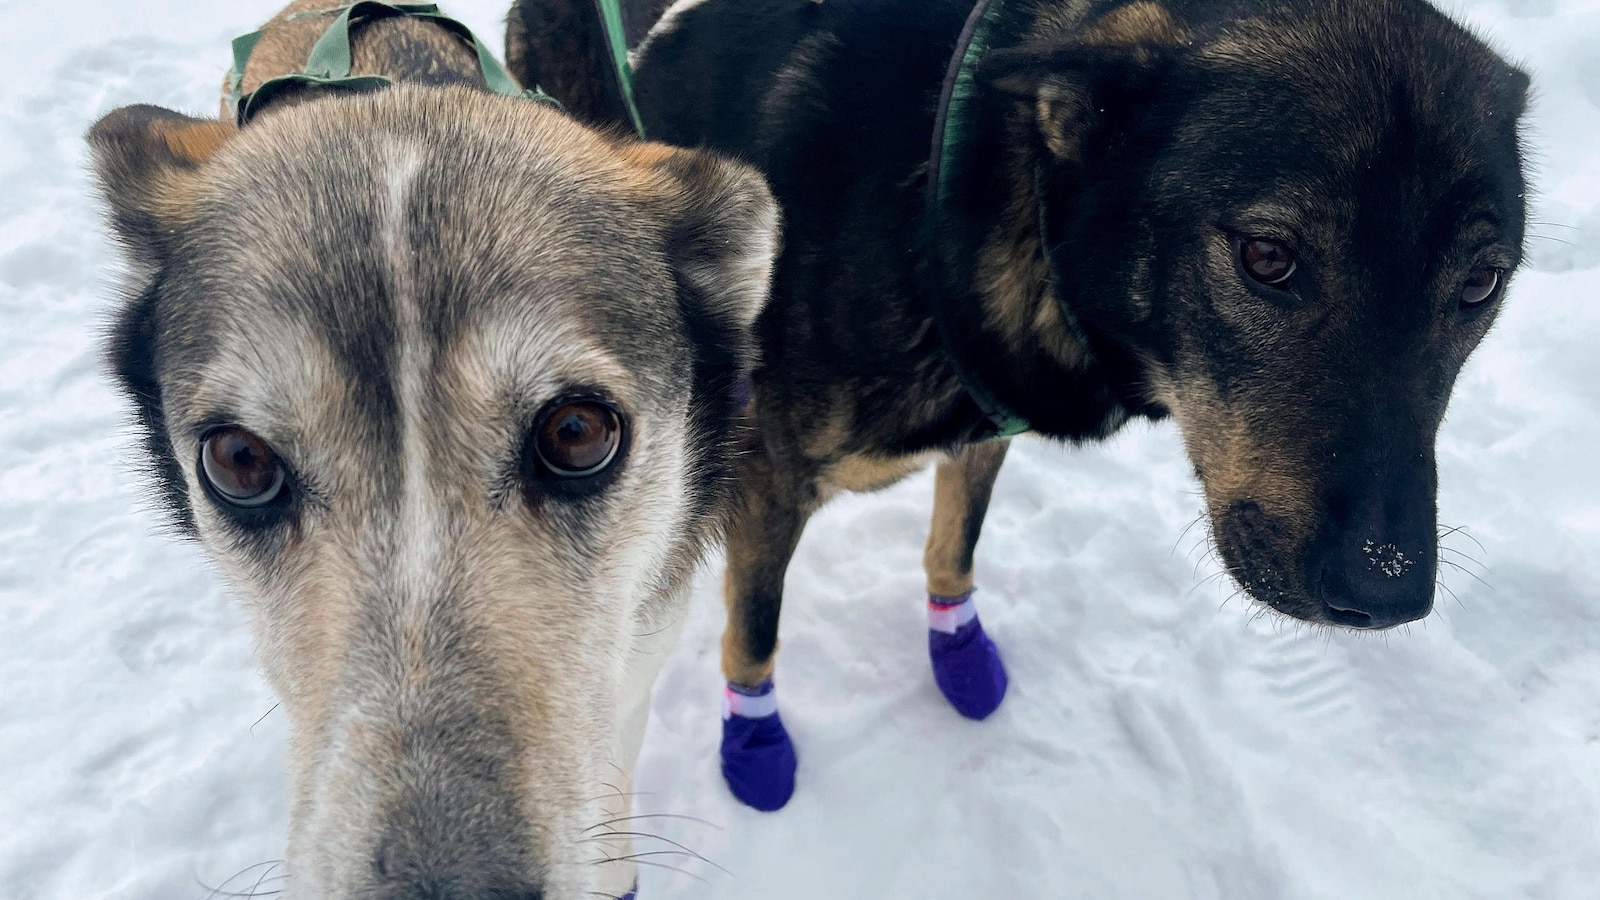 Alaska's Iditarod dogs get neon visibility harnesses after 5 were fatally hit while training